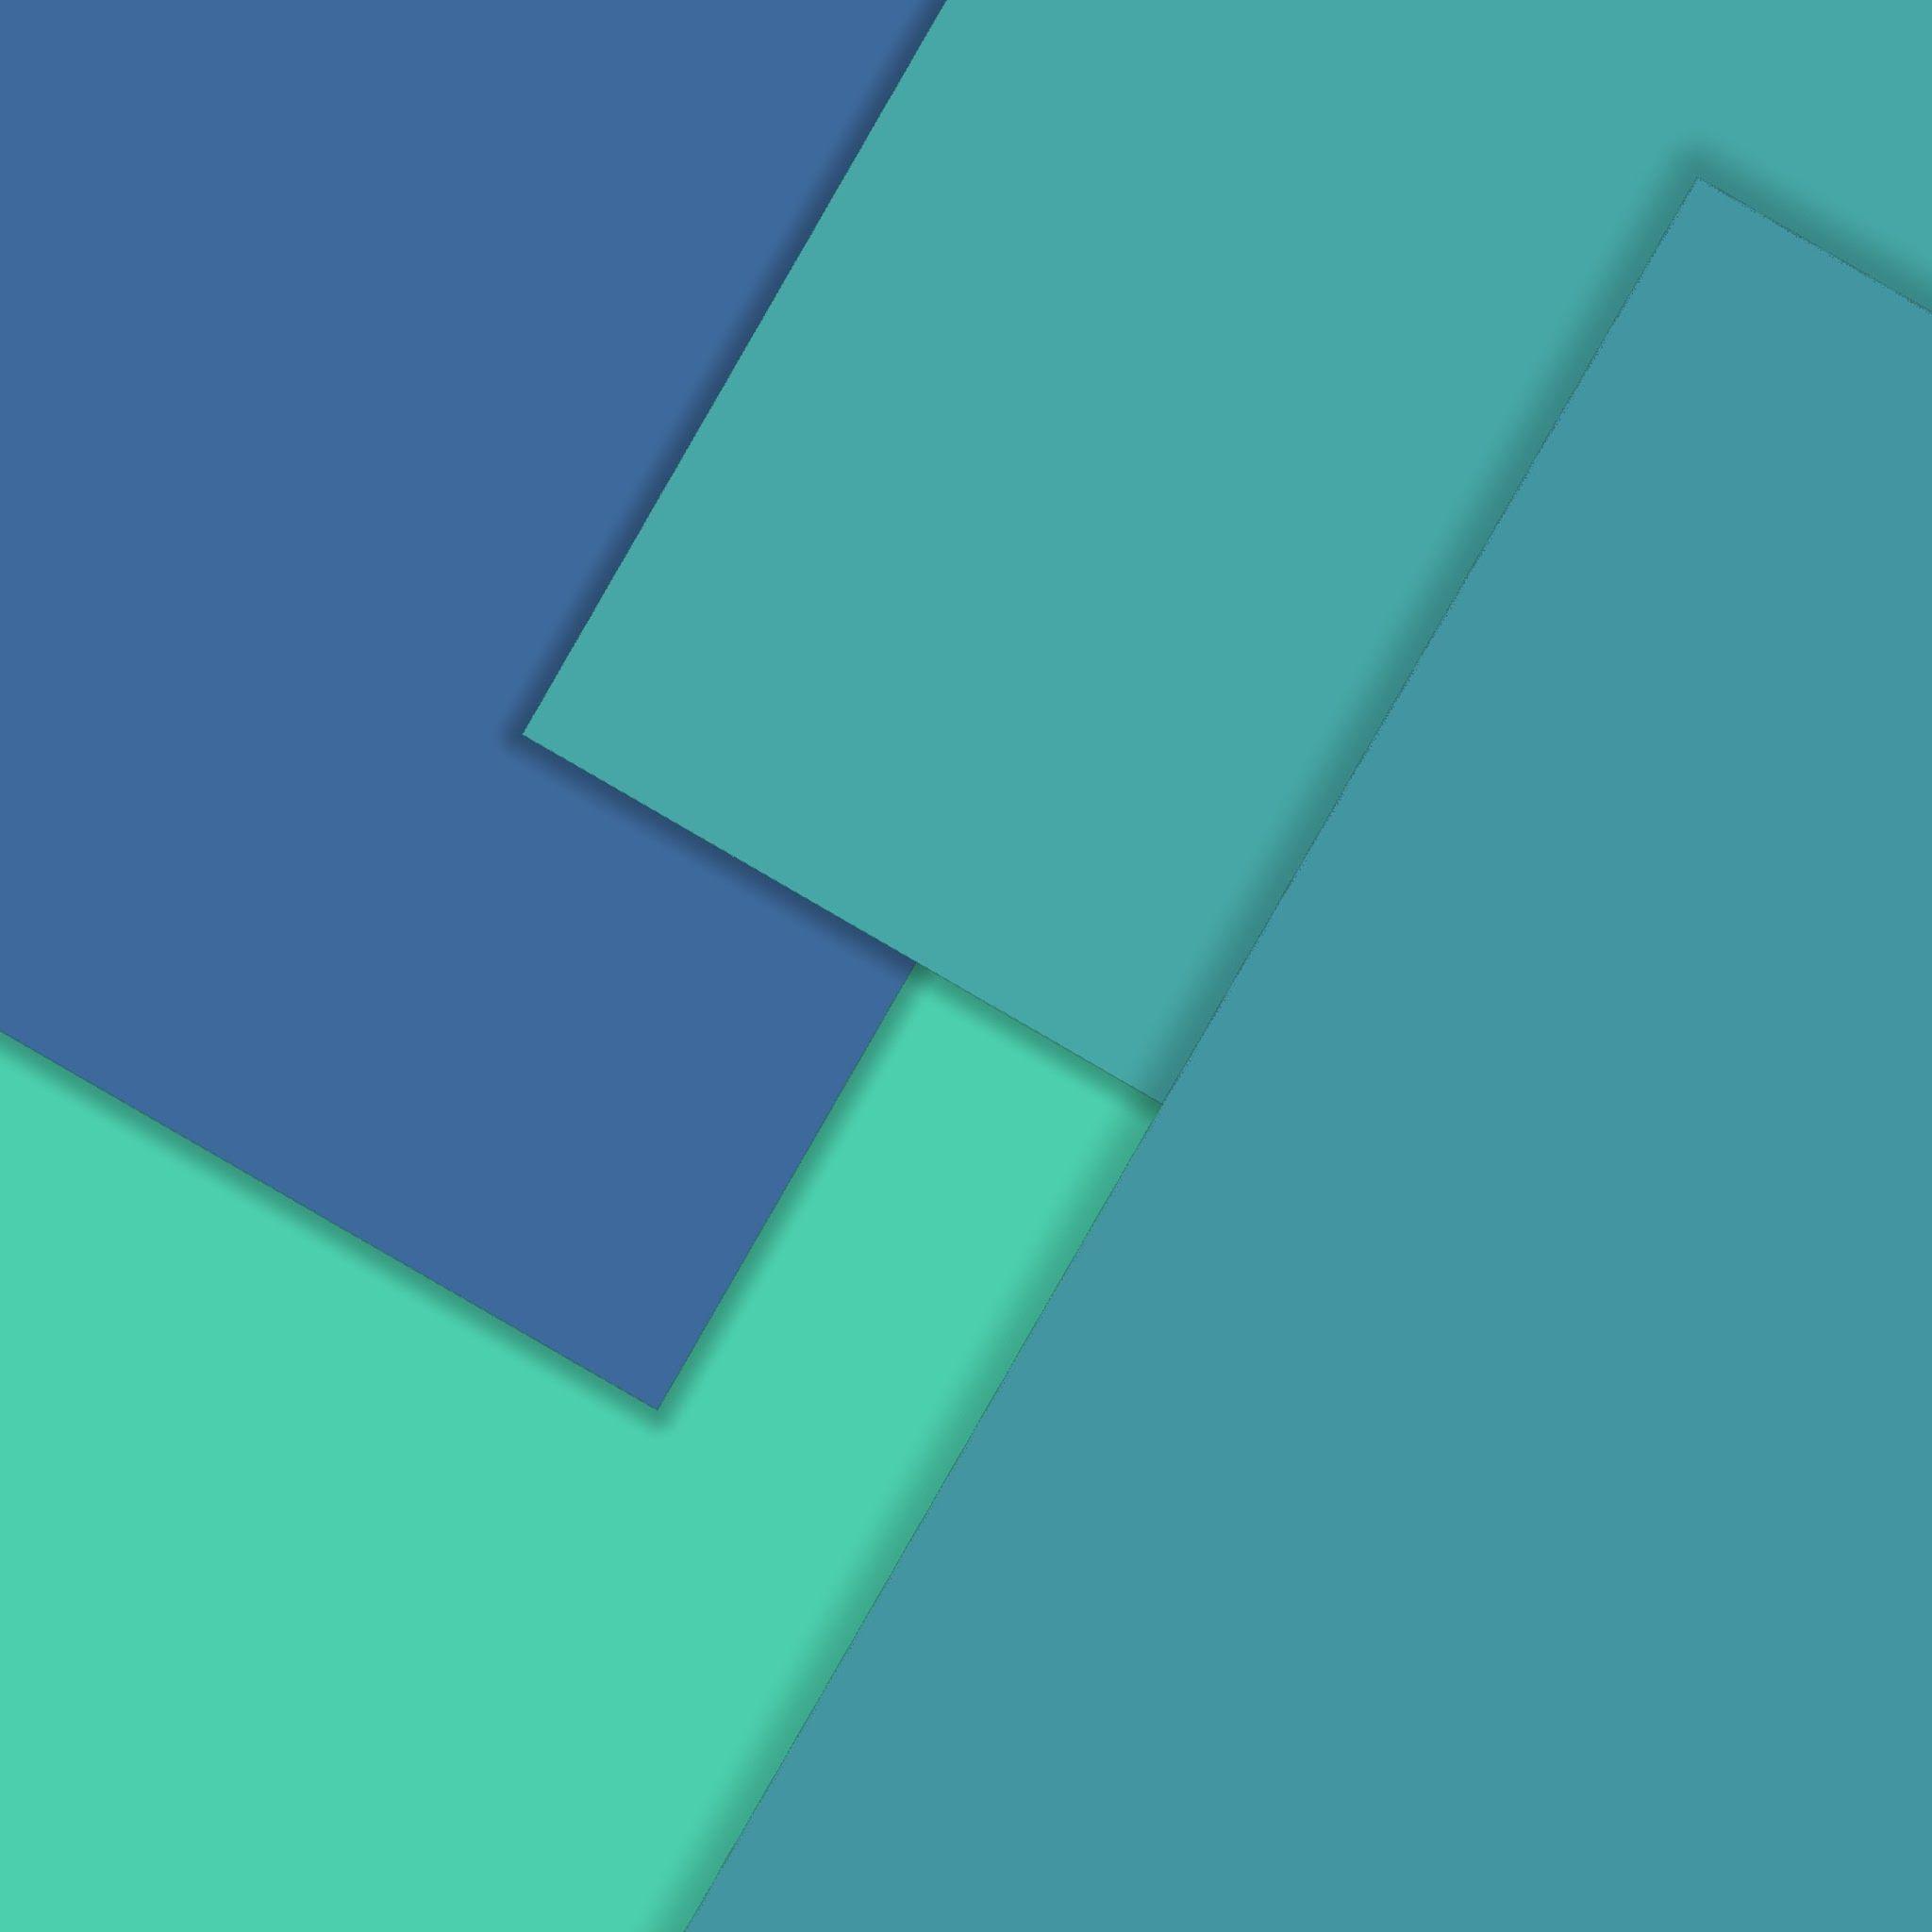 Material Design Inspired Wallpaper Collection For Your Device